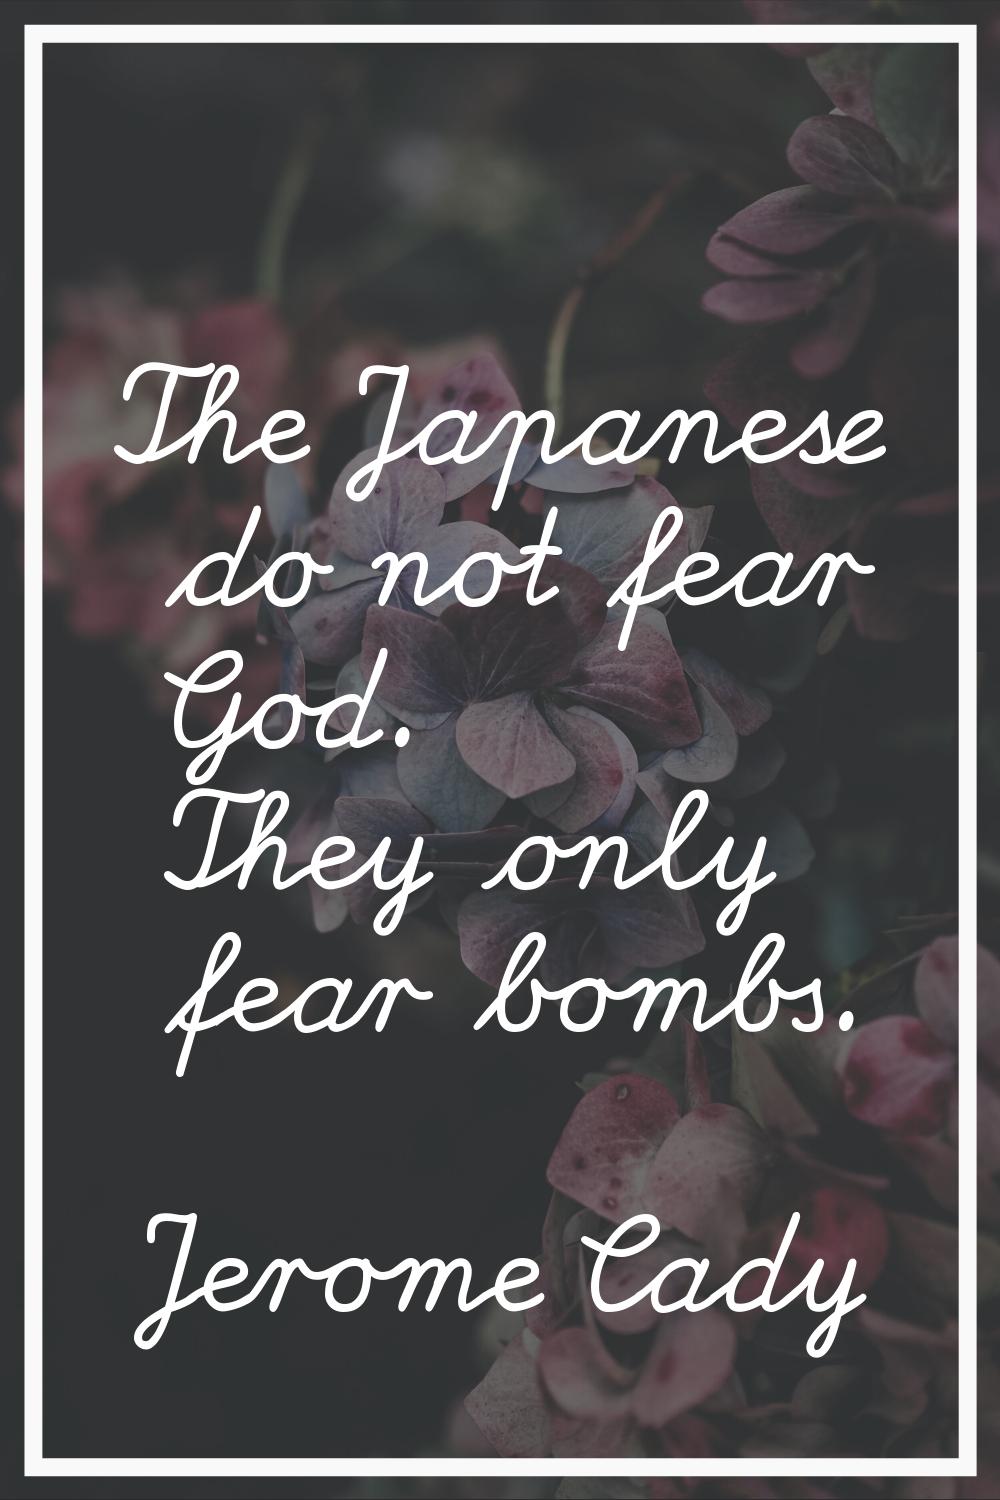 The Japanese do not fear God. They only fear bombs.